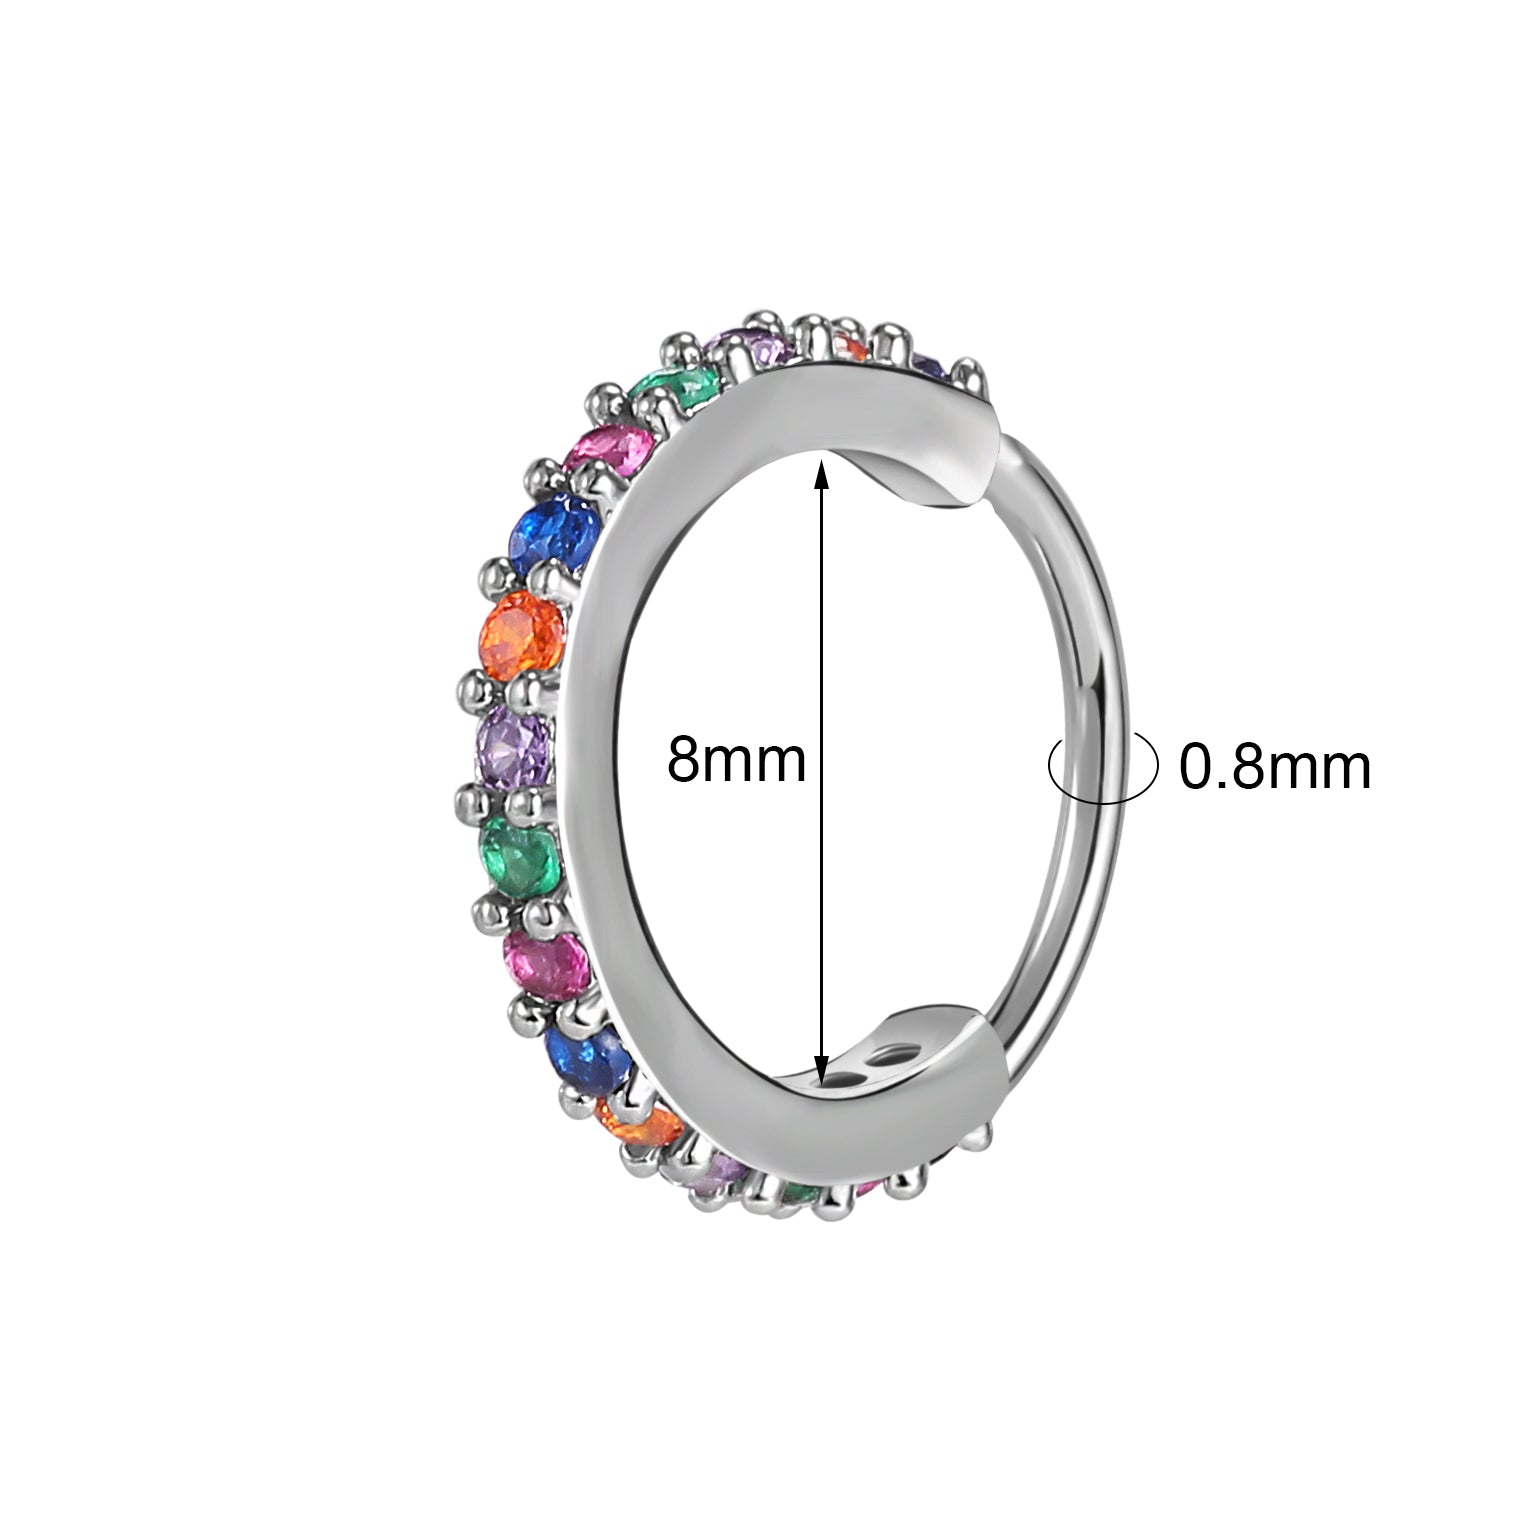 20g-colored-crystal-nose-ring-soft-wire-helix-cartilage-piercing